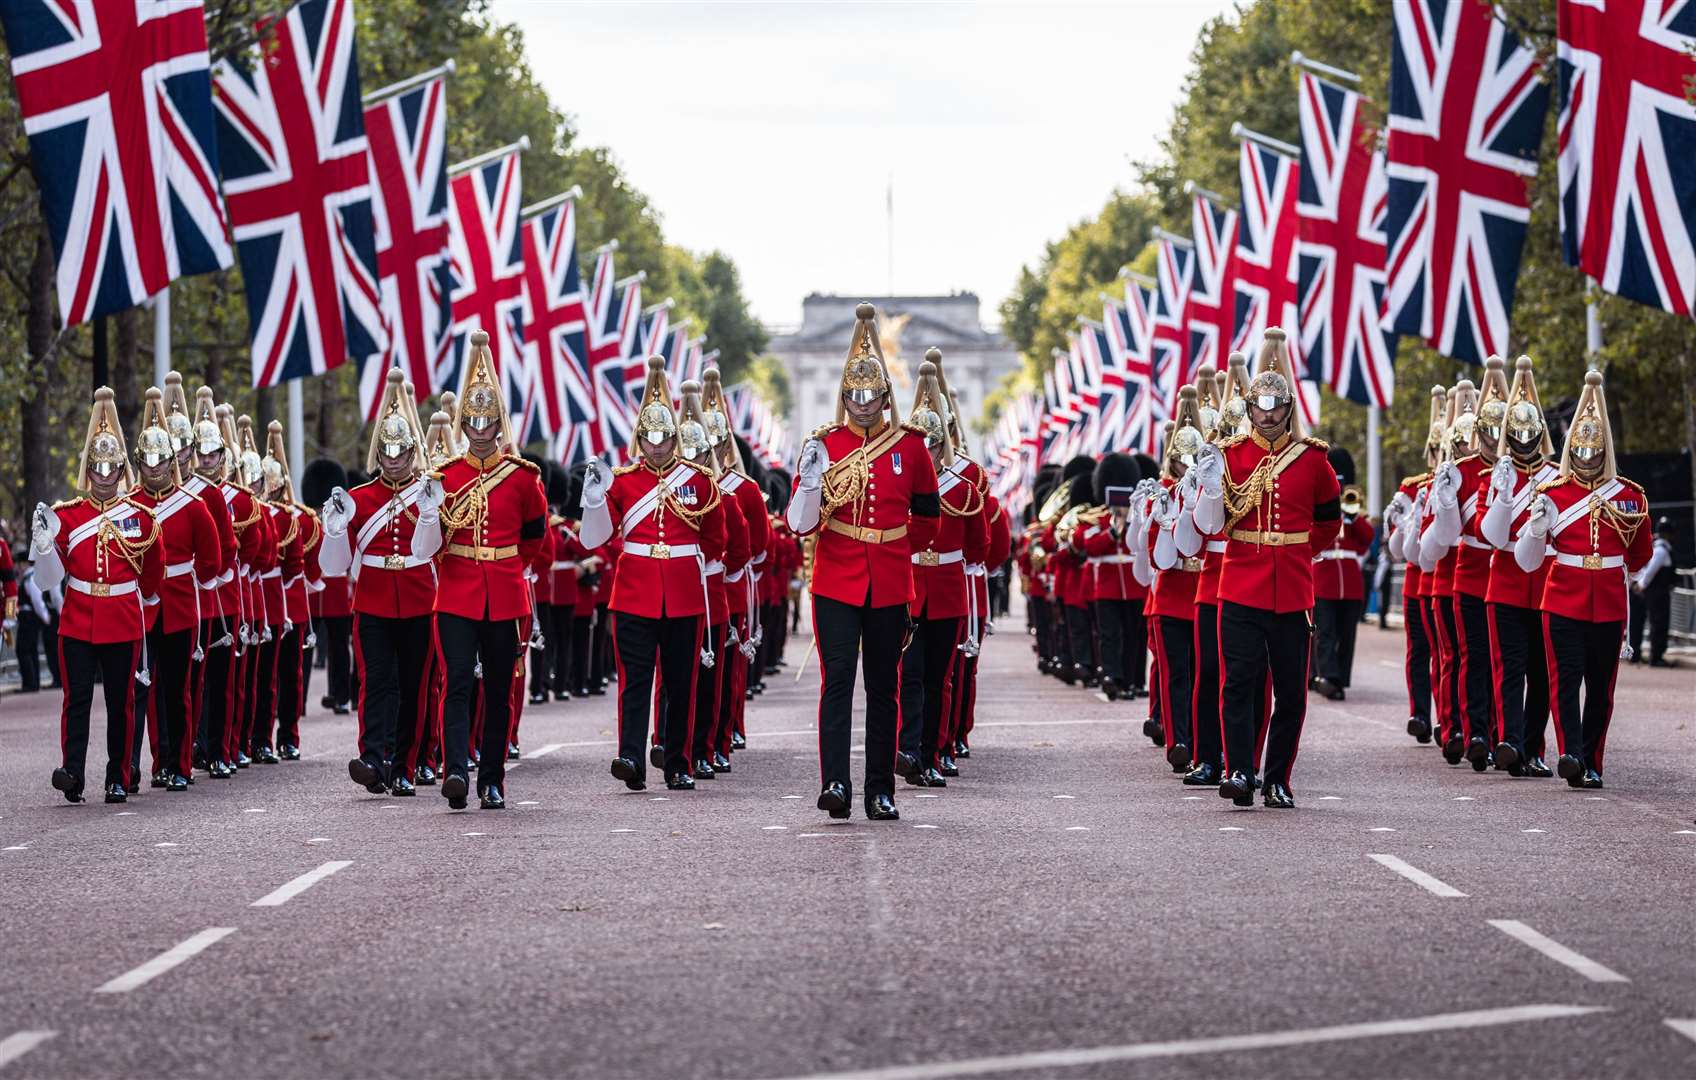 Thousands of military personnel are taking part in the procession. Image: MOD.